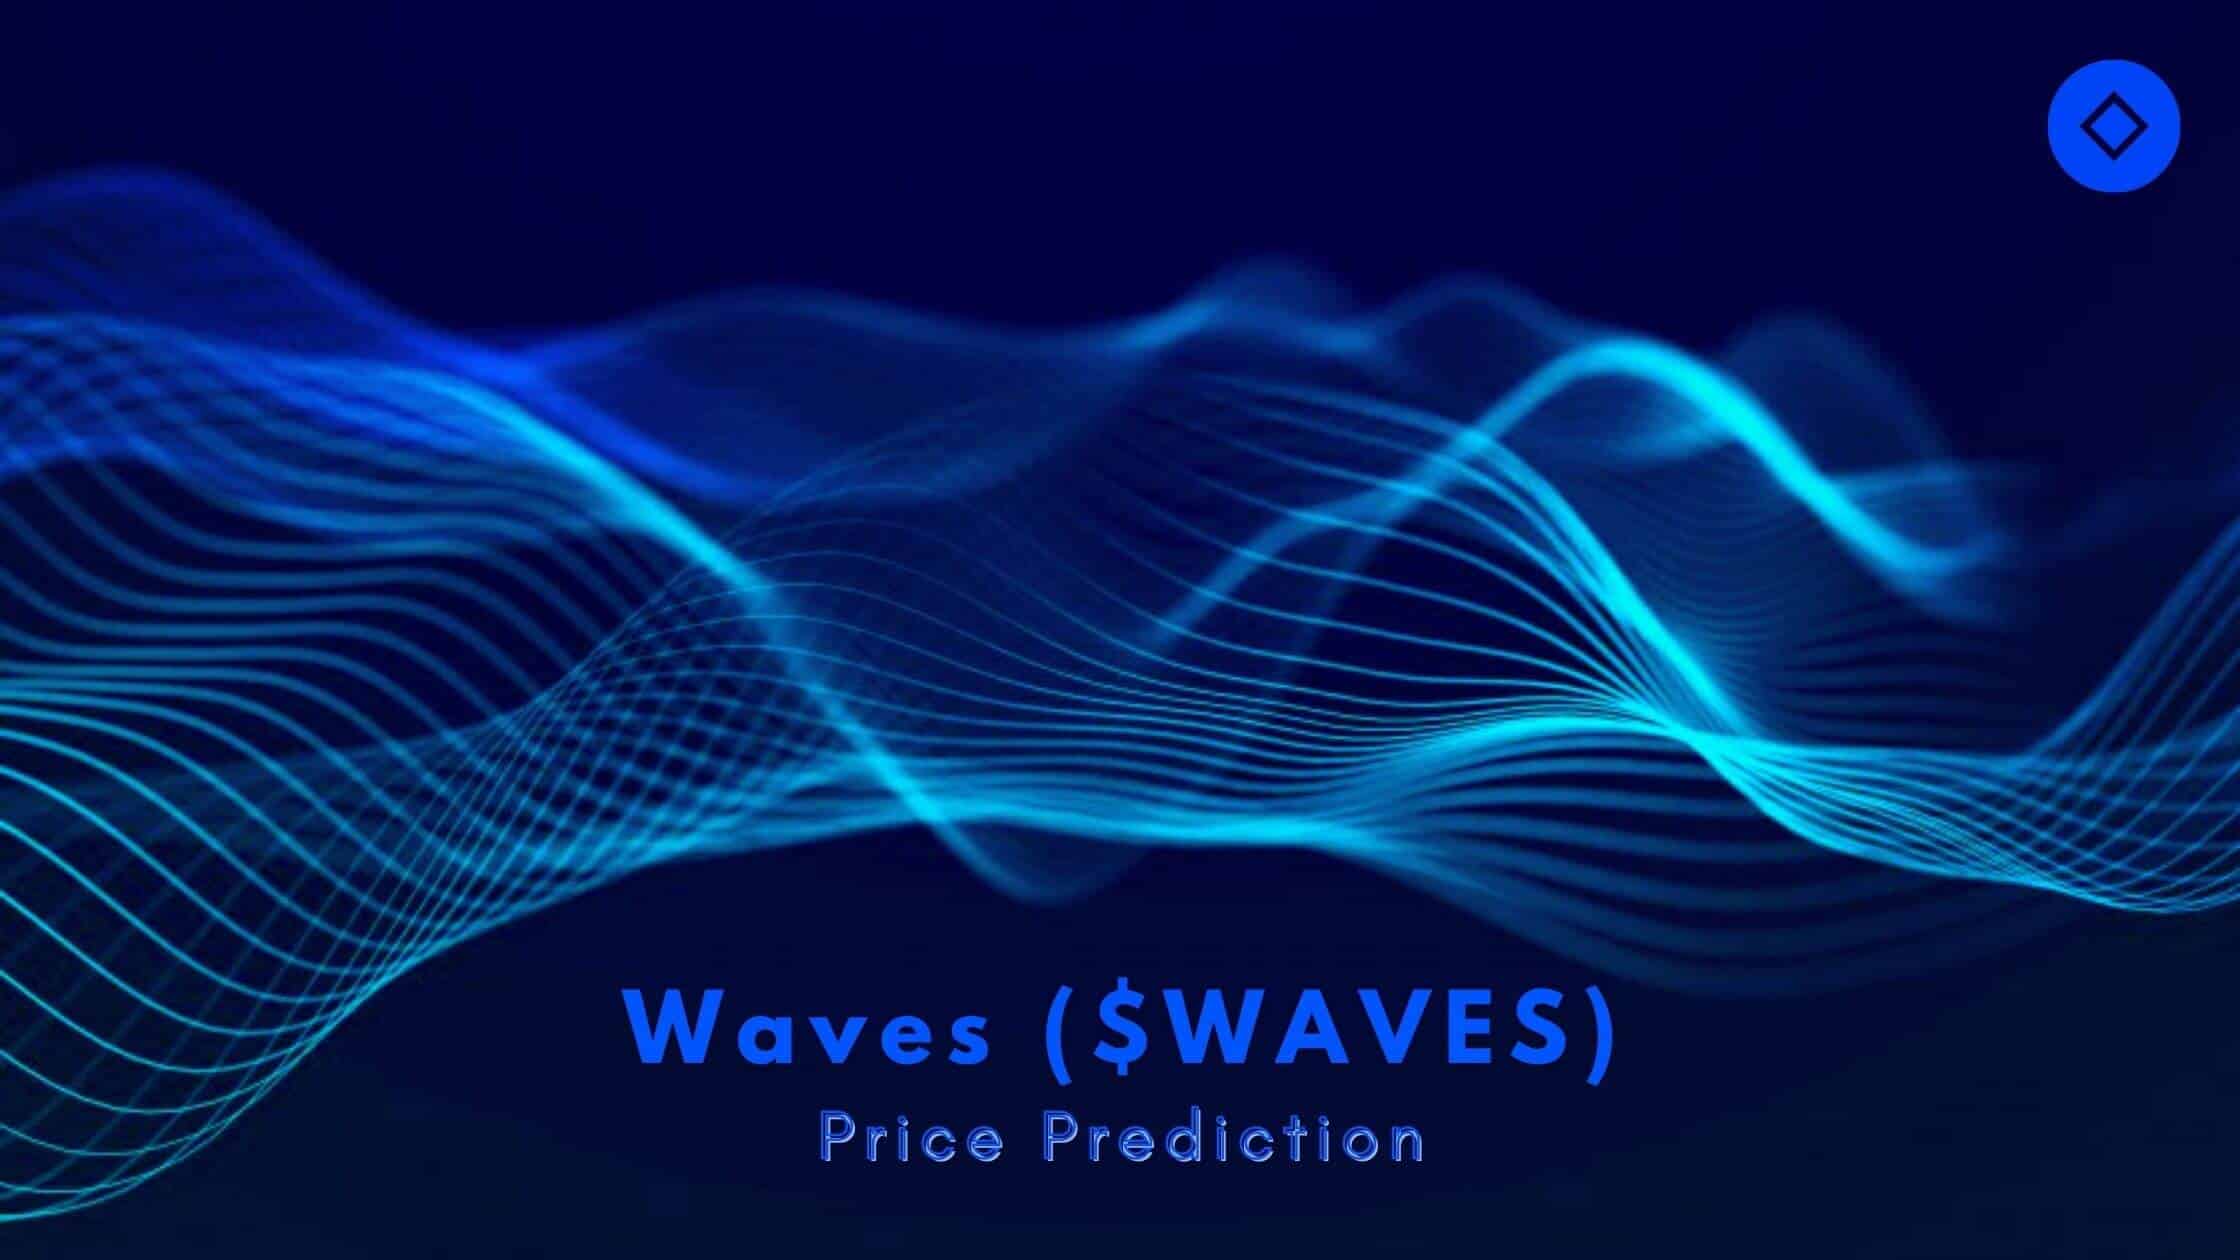 Waves ($WAVES) Price Prediction – 2023, 2025, 2030 How Will Be The Move